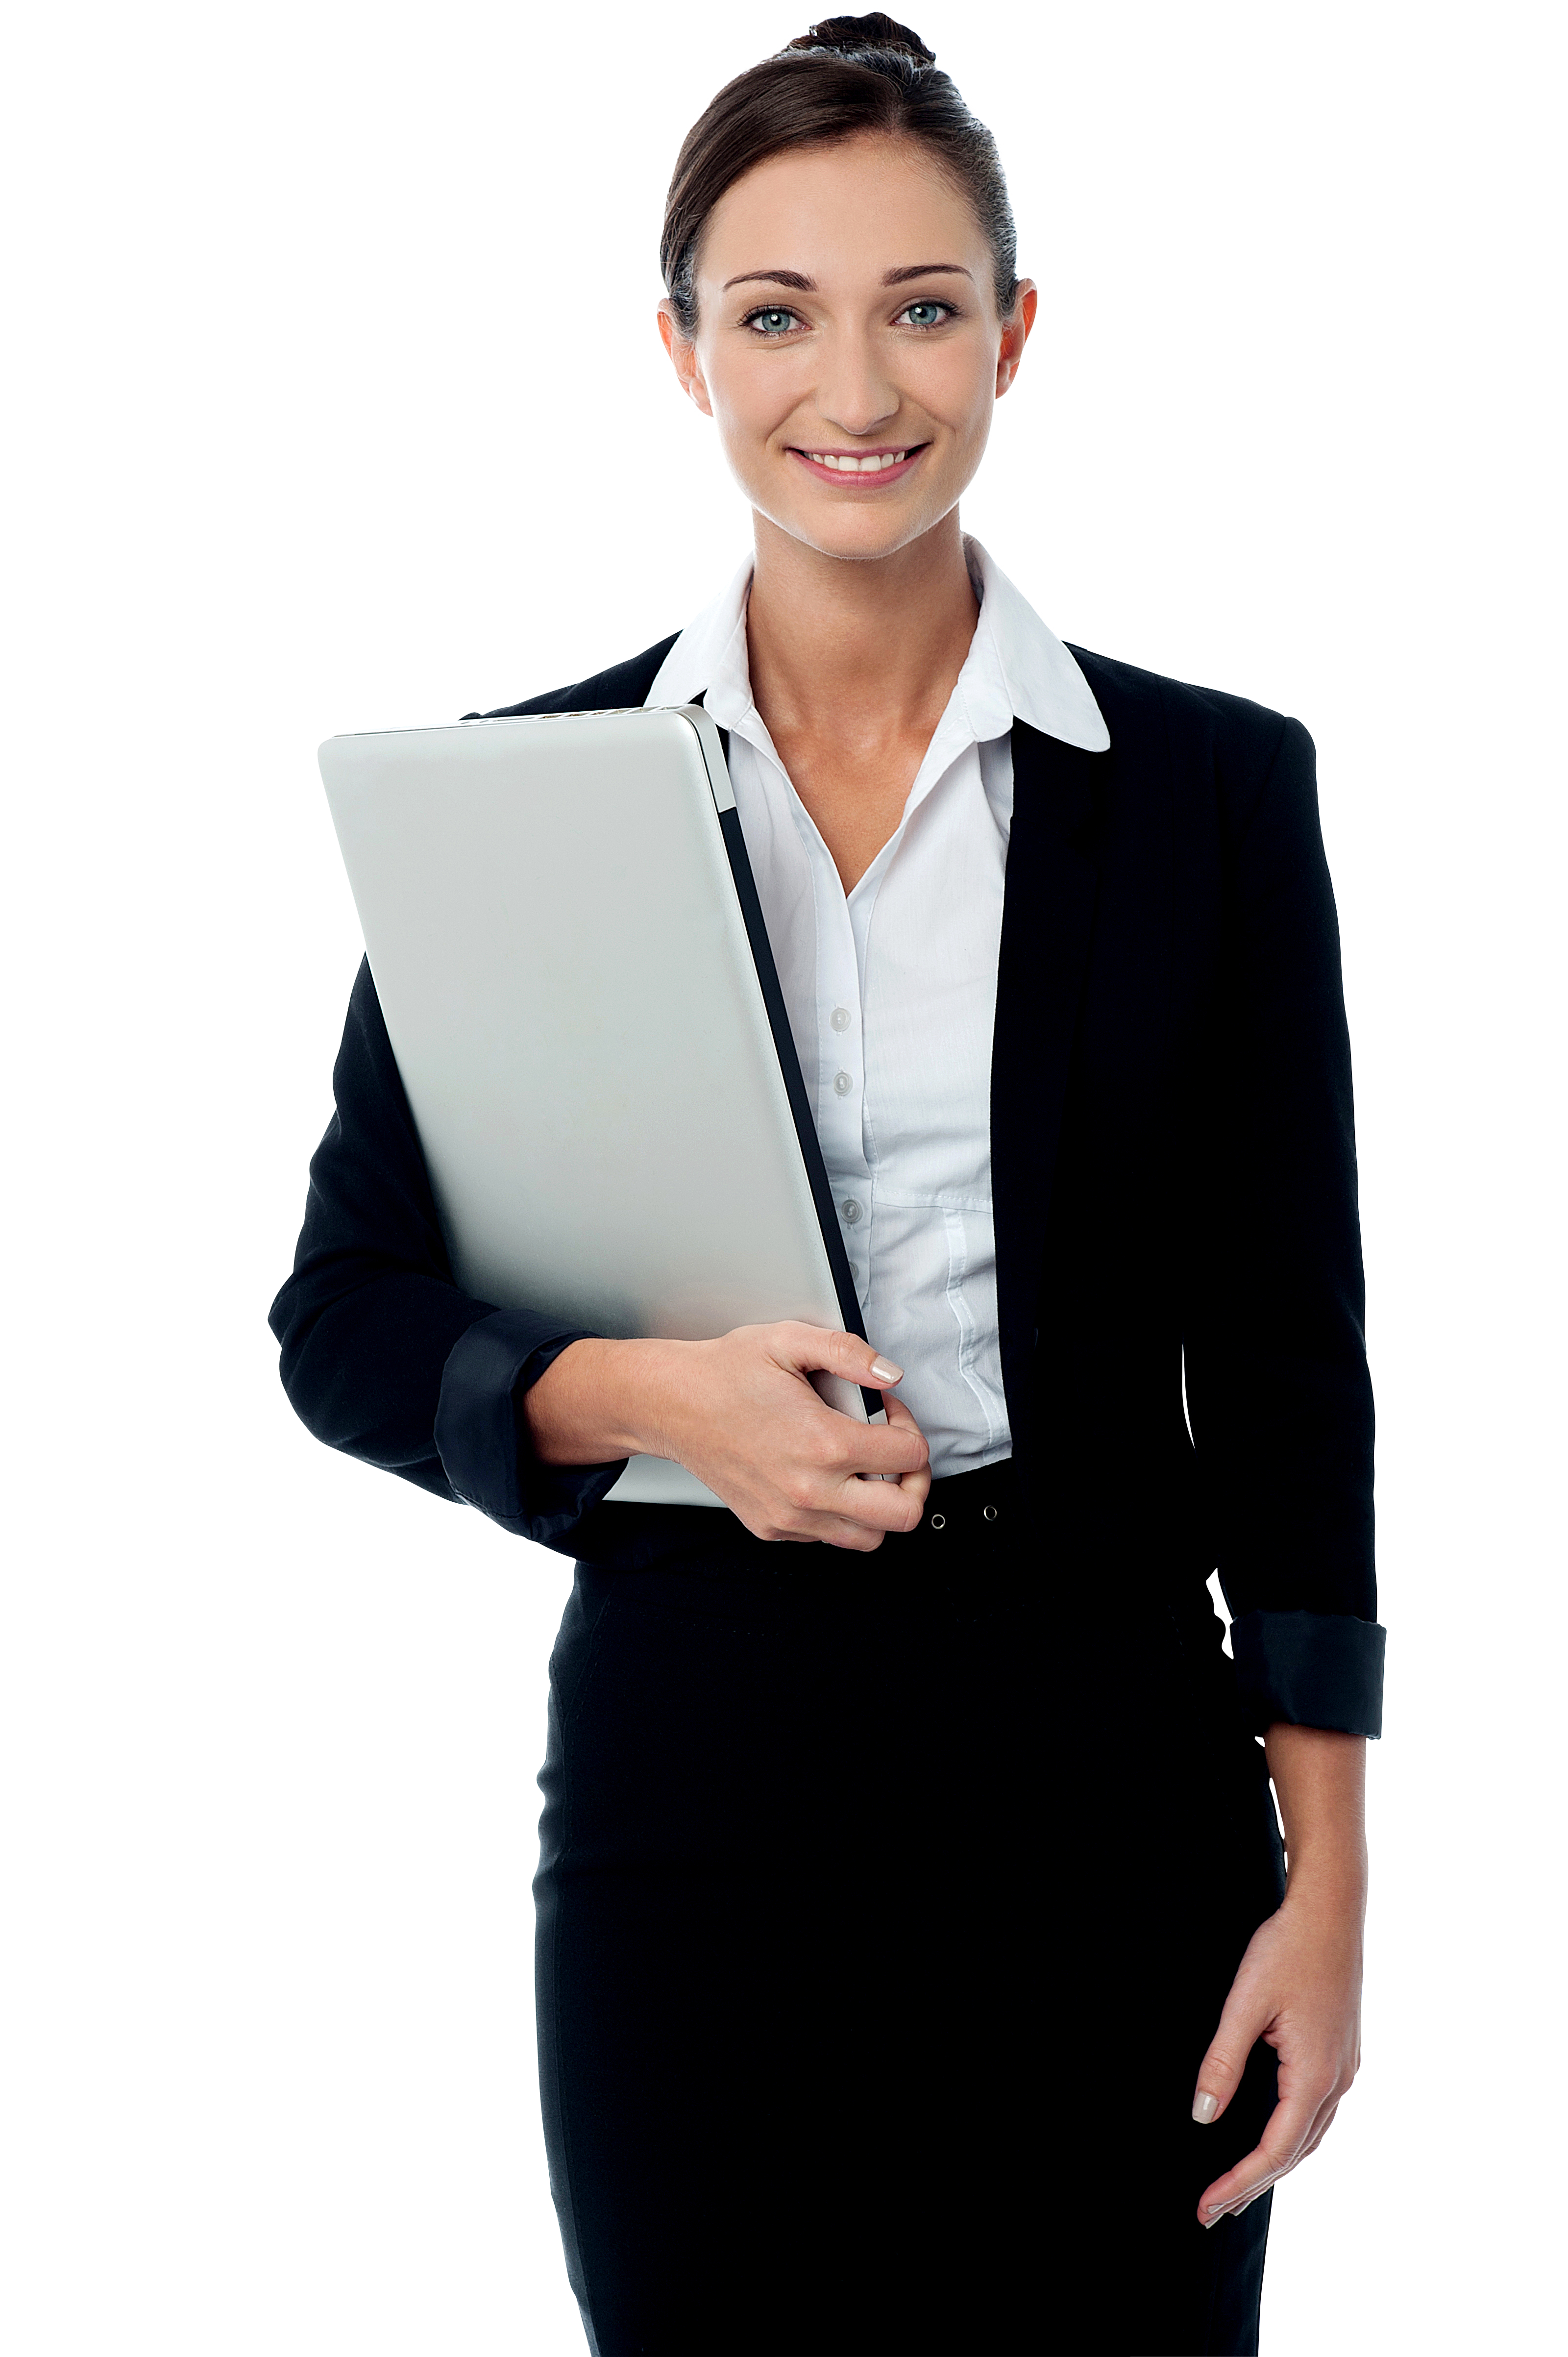 Download Business Woman Girl Png Image HQ PNG Image in 